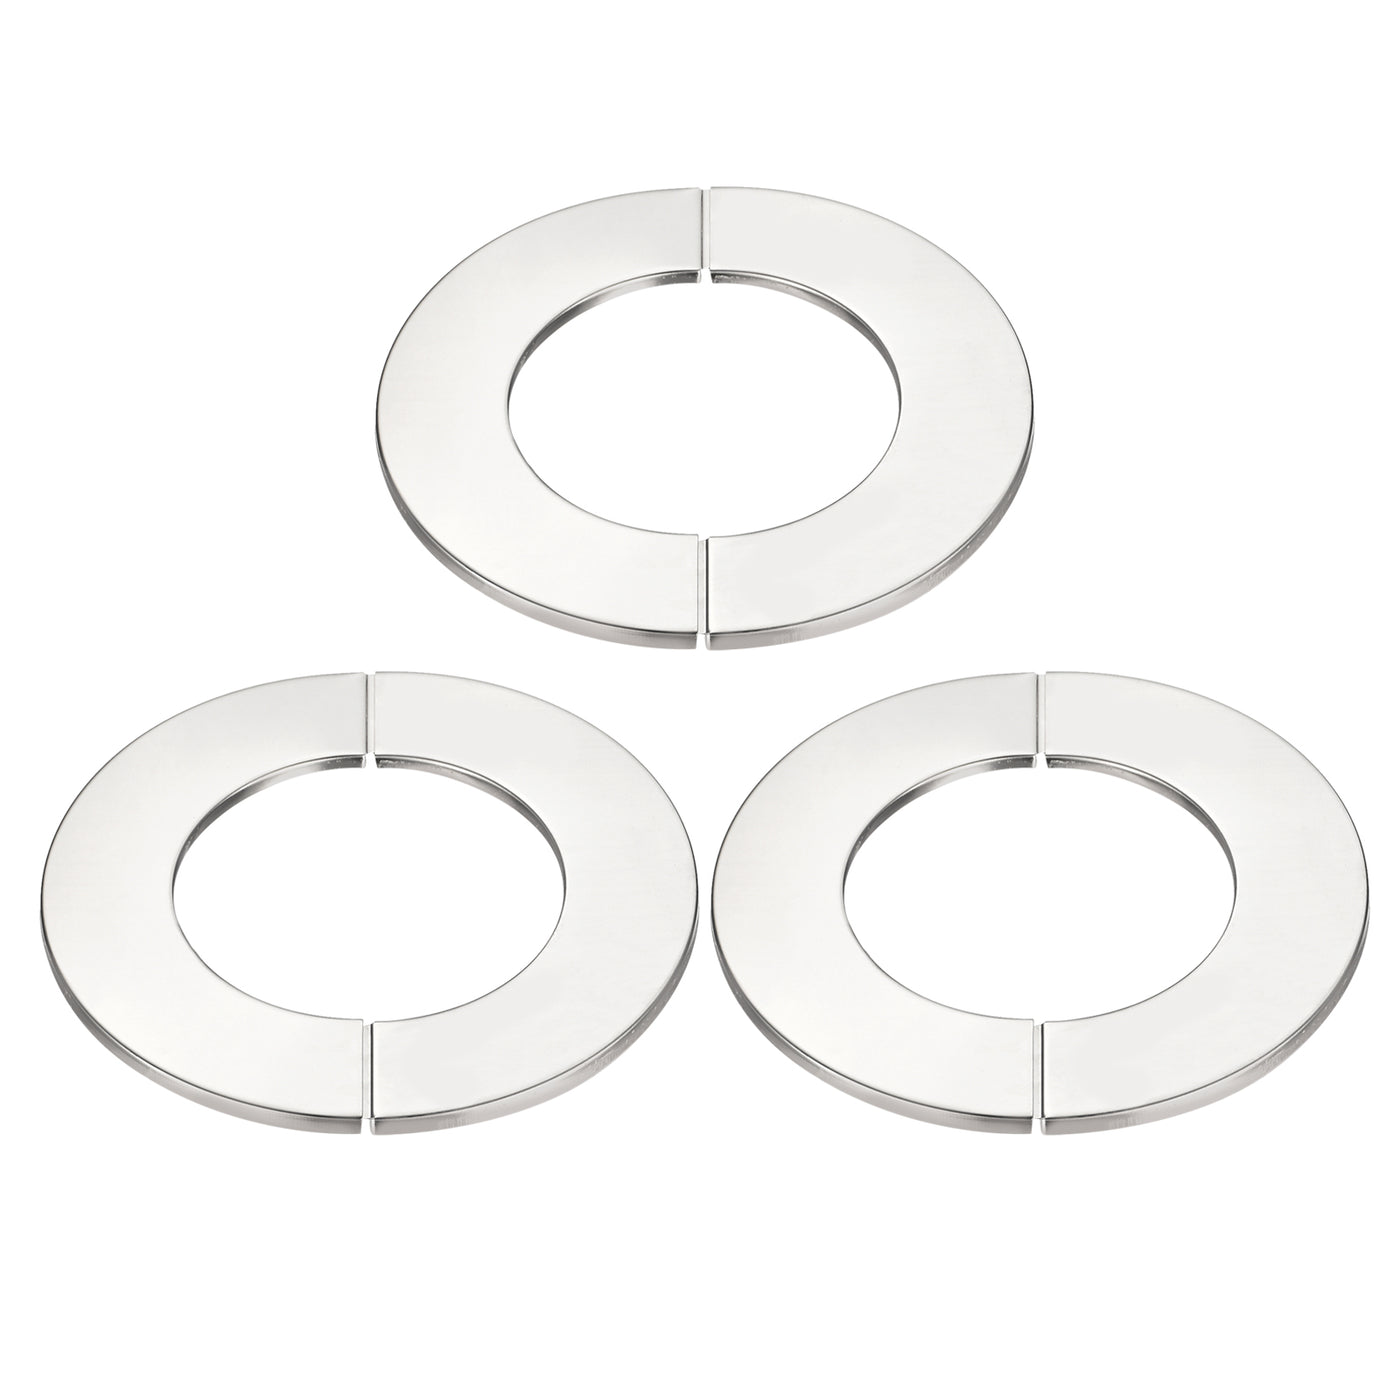 Uxcell Uxcell Wall Split Flange, 201 Stainless Steel Round Escutcheon Plate for 101mm Diameter Pipe 3Pcs